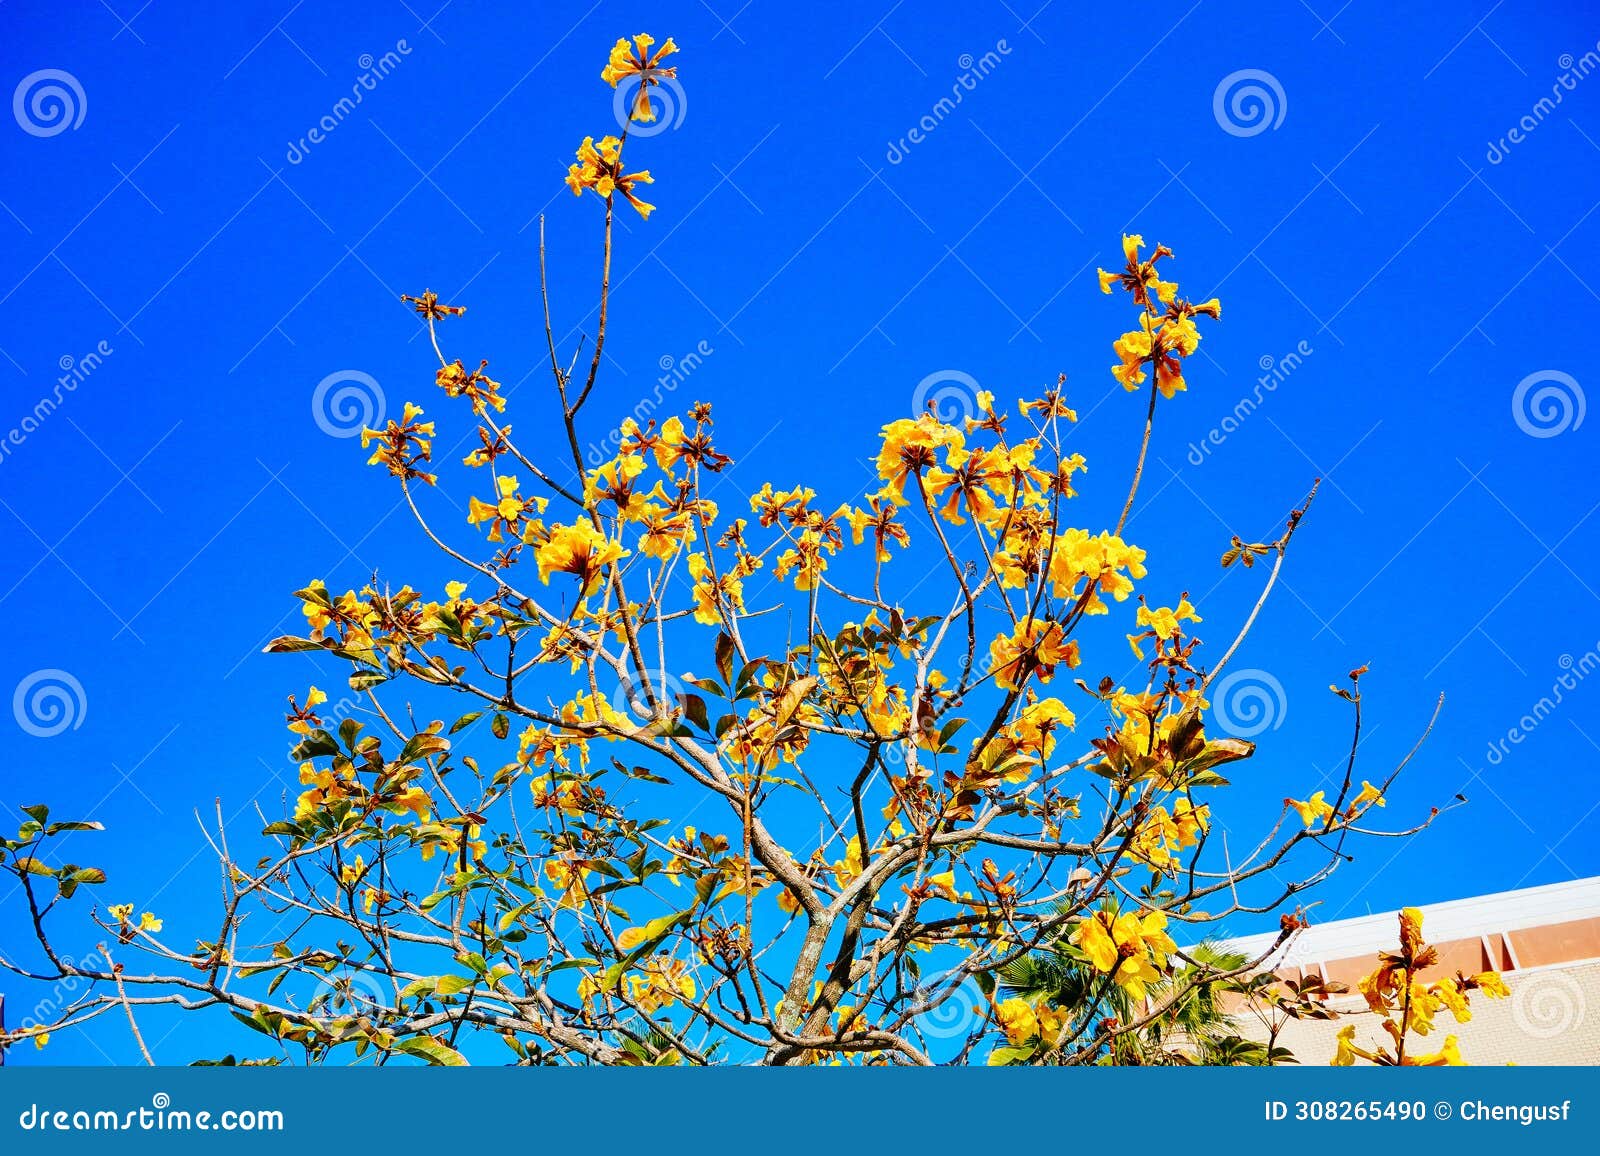 blooming guayacan or handroanthus chrysanthus or golden bell tree